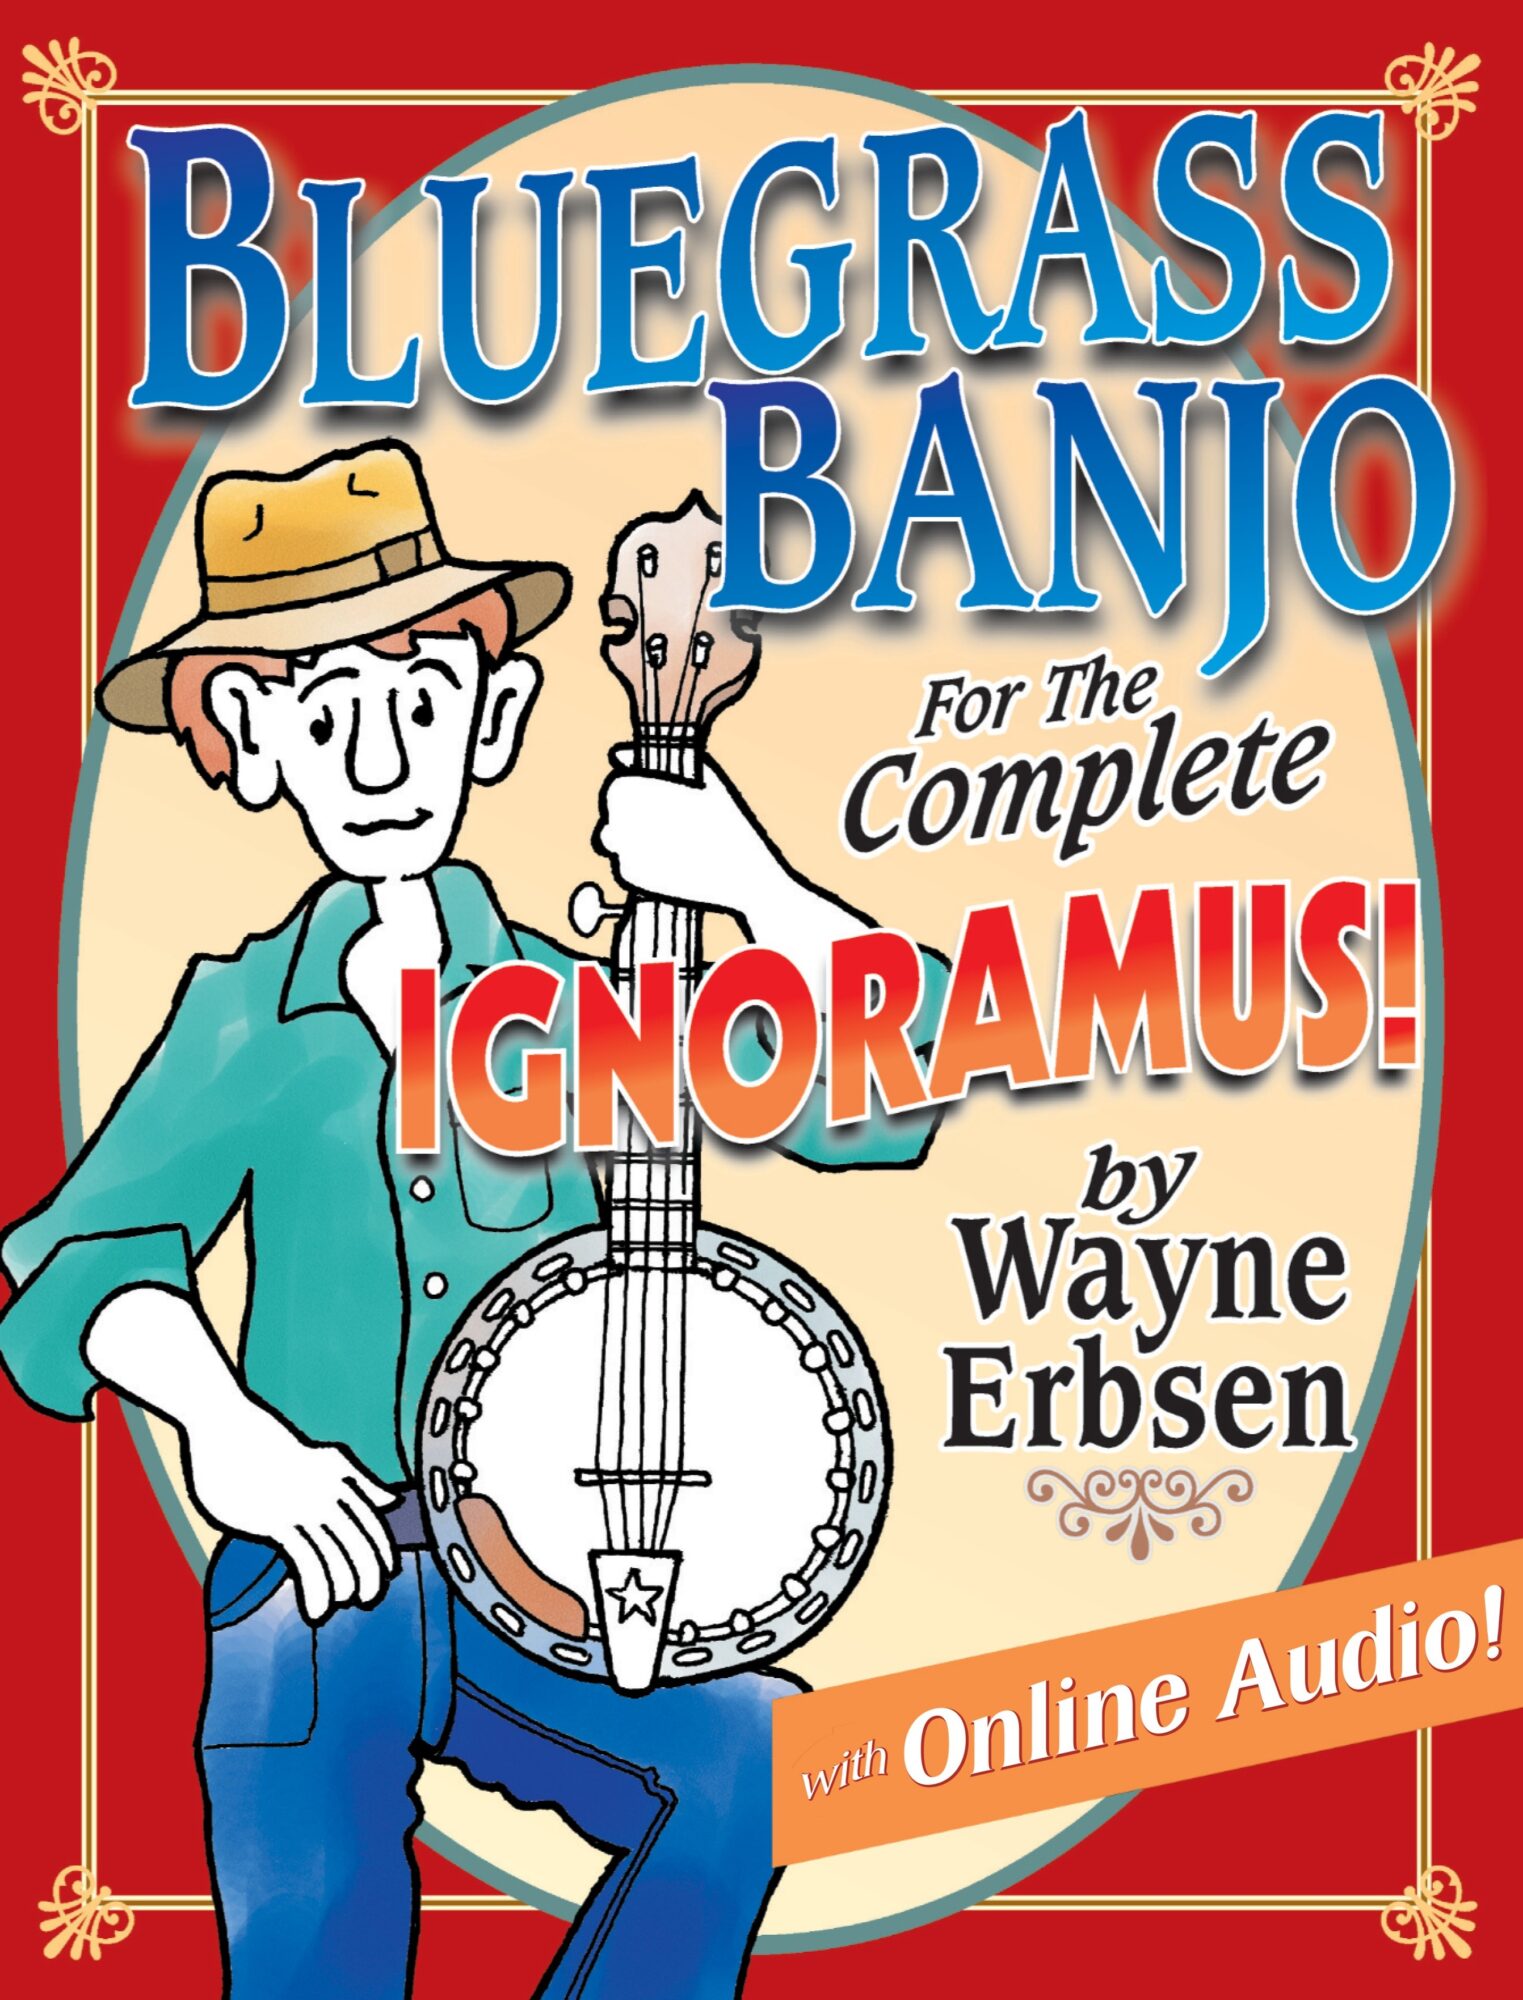 Bluegrass Banjo for the Complete Ignoramus! - Native Ground Books and Music